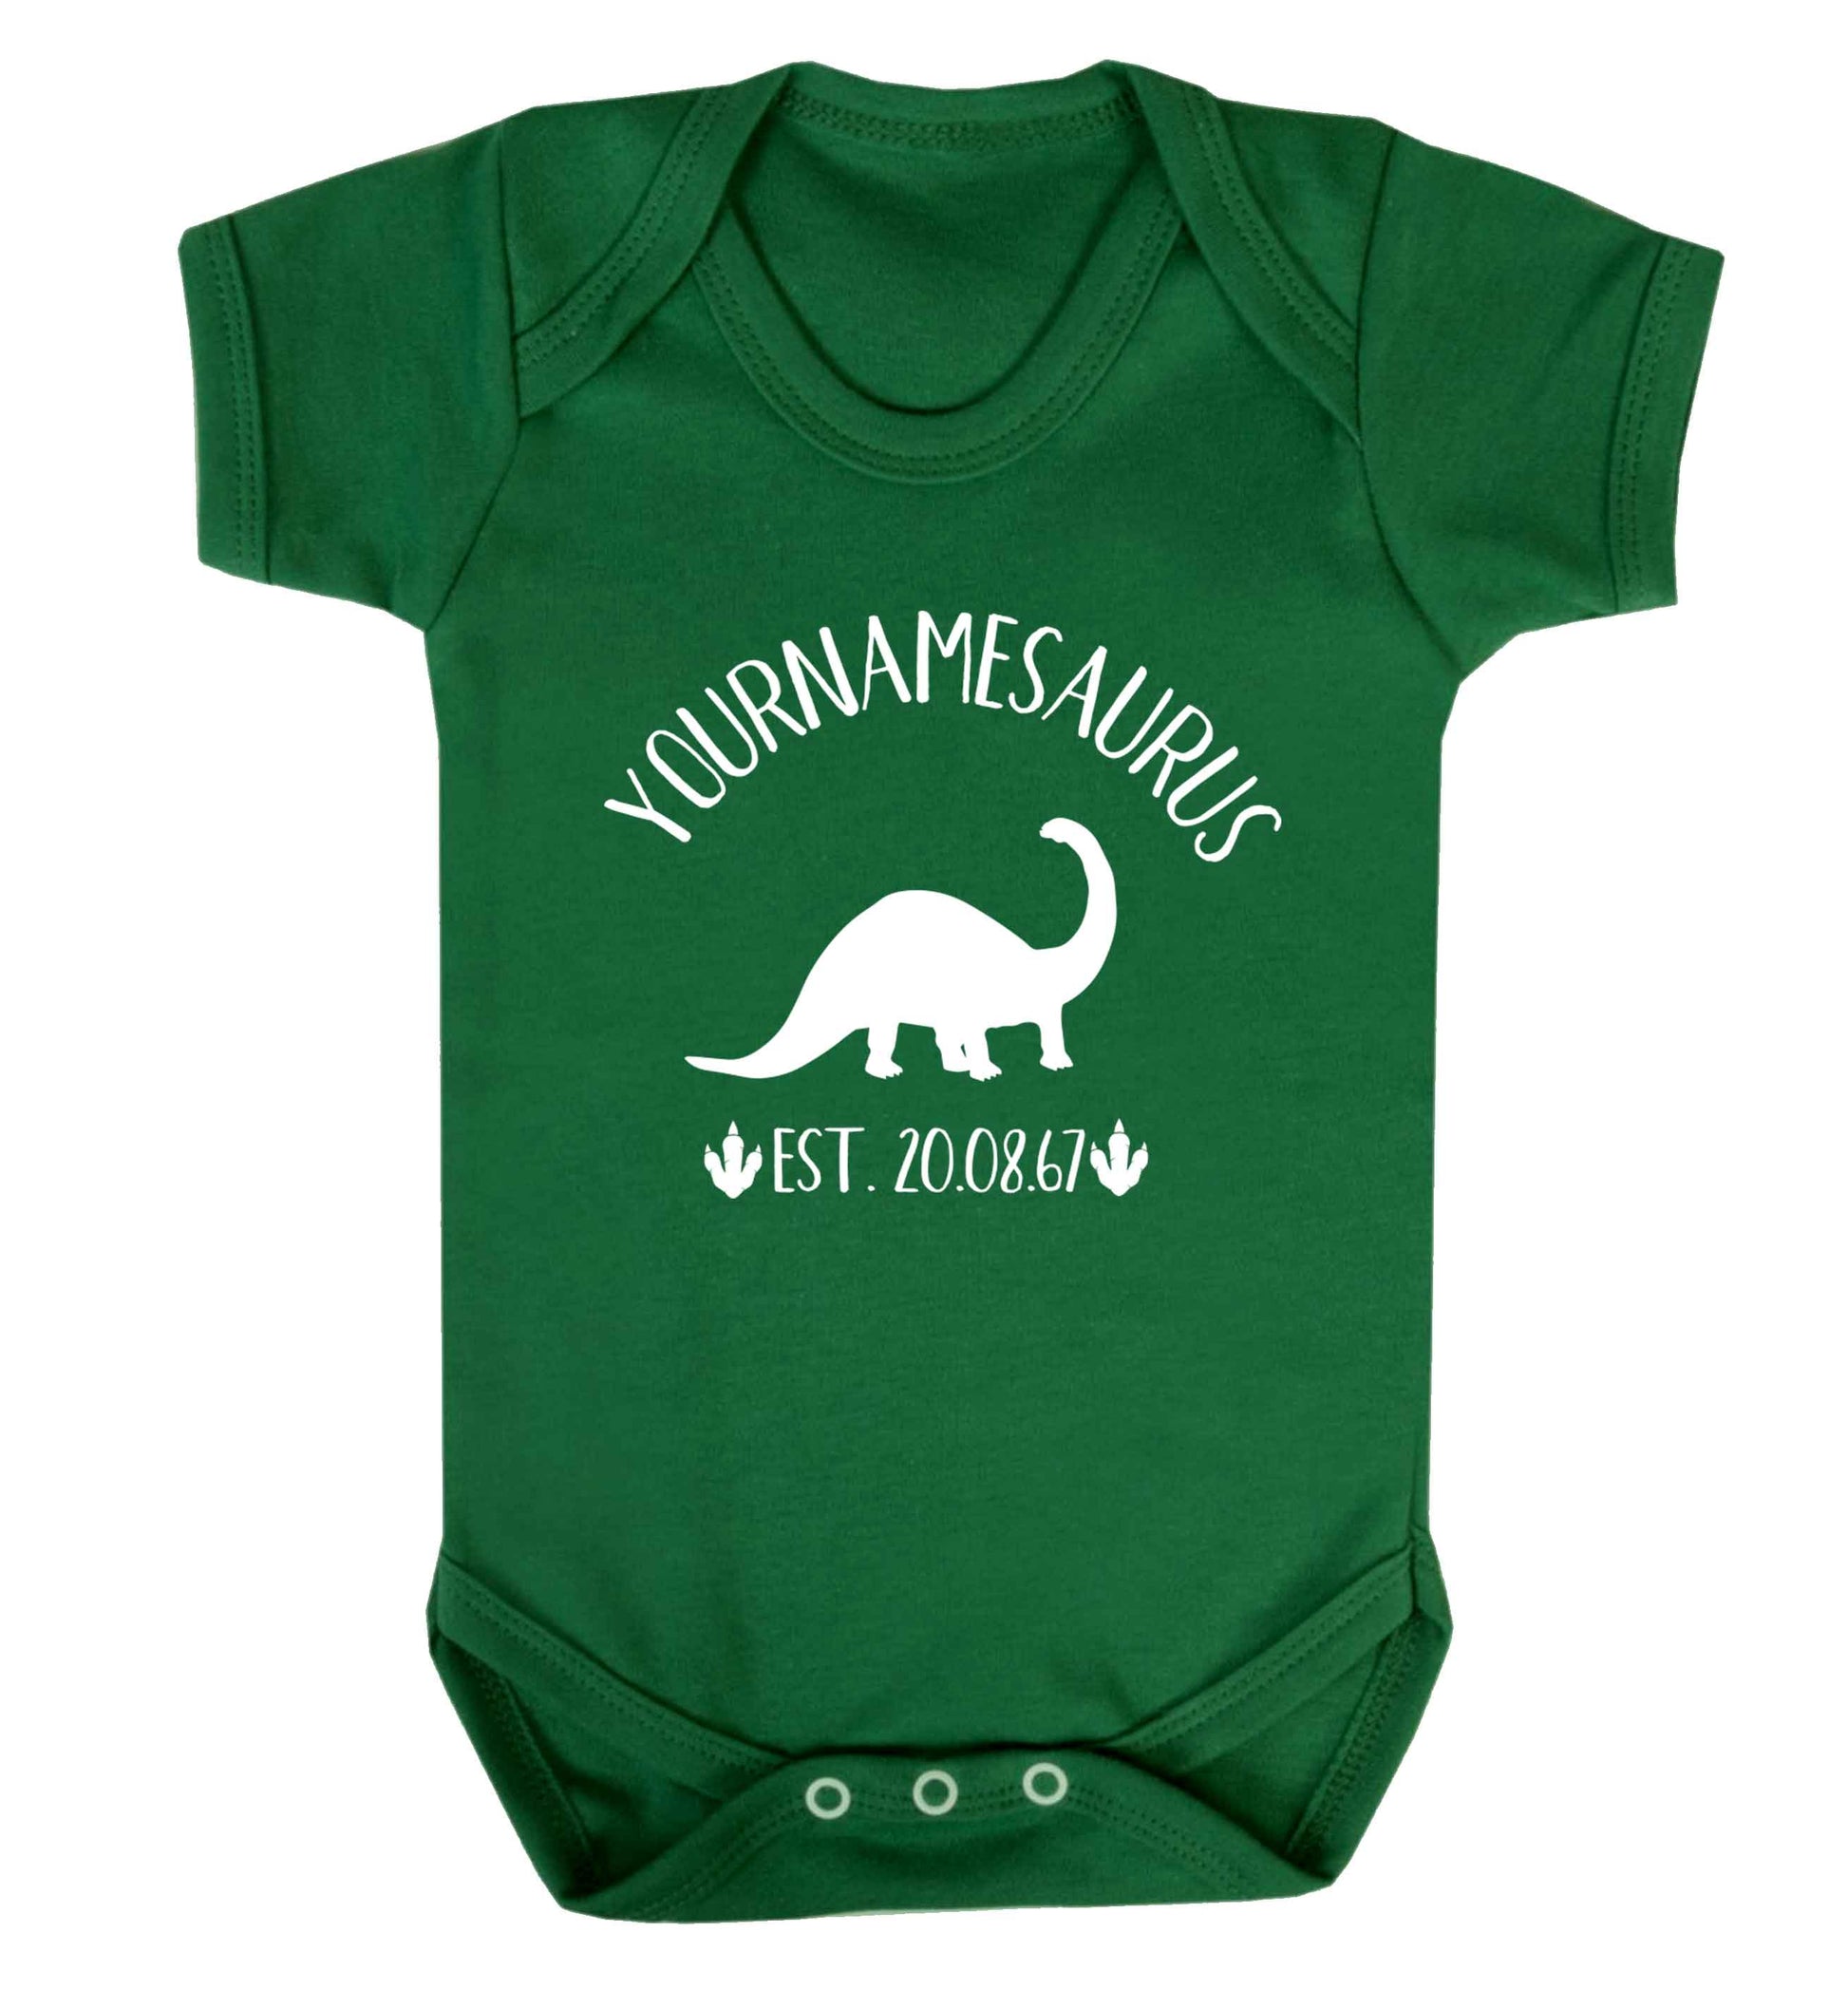 Personalised (your name) dinosaur birthday Baby Vest green 18-24 months